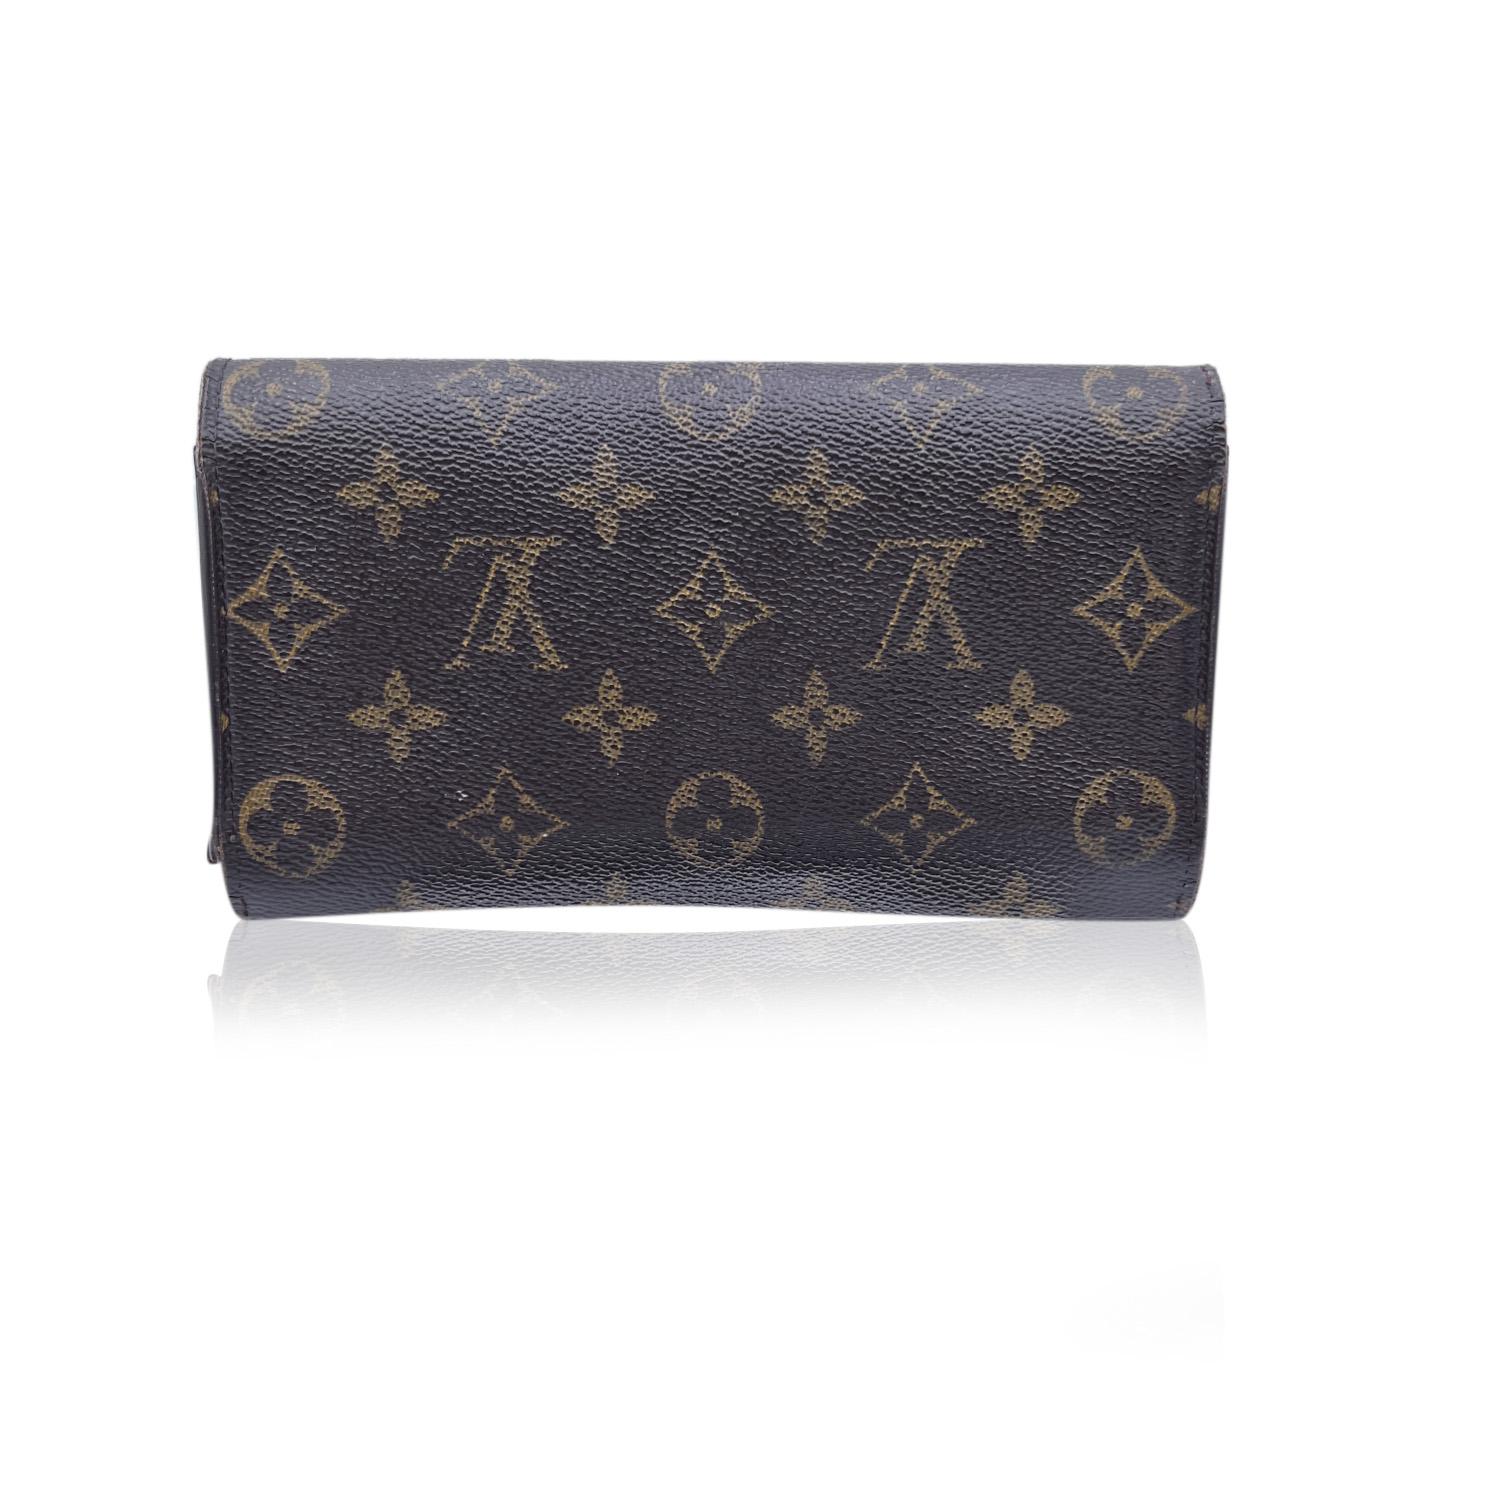 Louis Vuitton Monogram Canvas International Wallet. Monogram canvas exterior and genuine leather interior. 6 credit card slots. 2 long compartments for bills and papers. Snap closure. Pen holder. Interior coin pocket also with snap closure. Golden